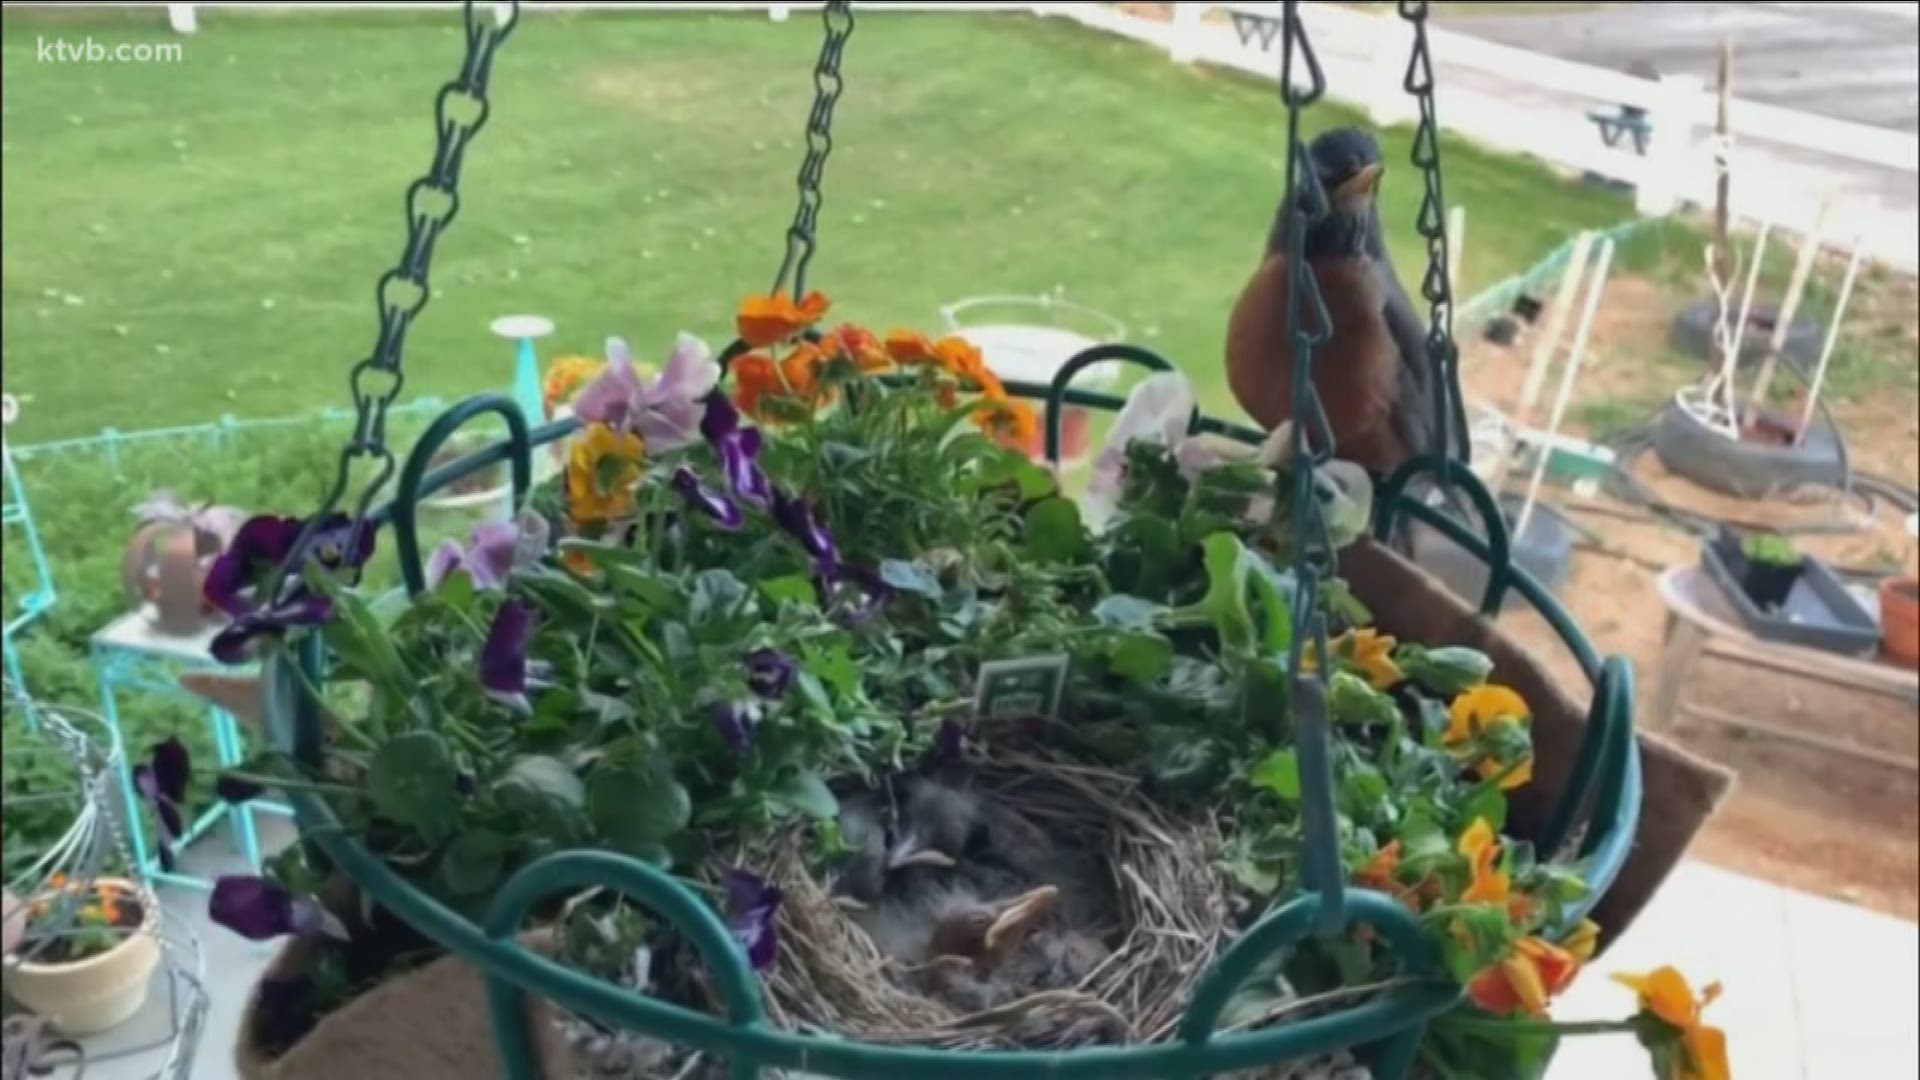 Andy Andrews found some robin eggs in a hanging basket in his yard. The eggs have since hatched.